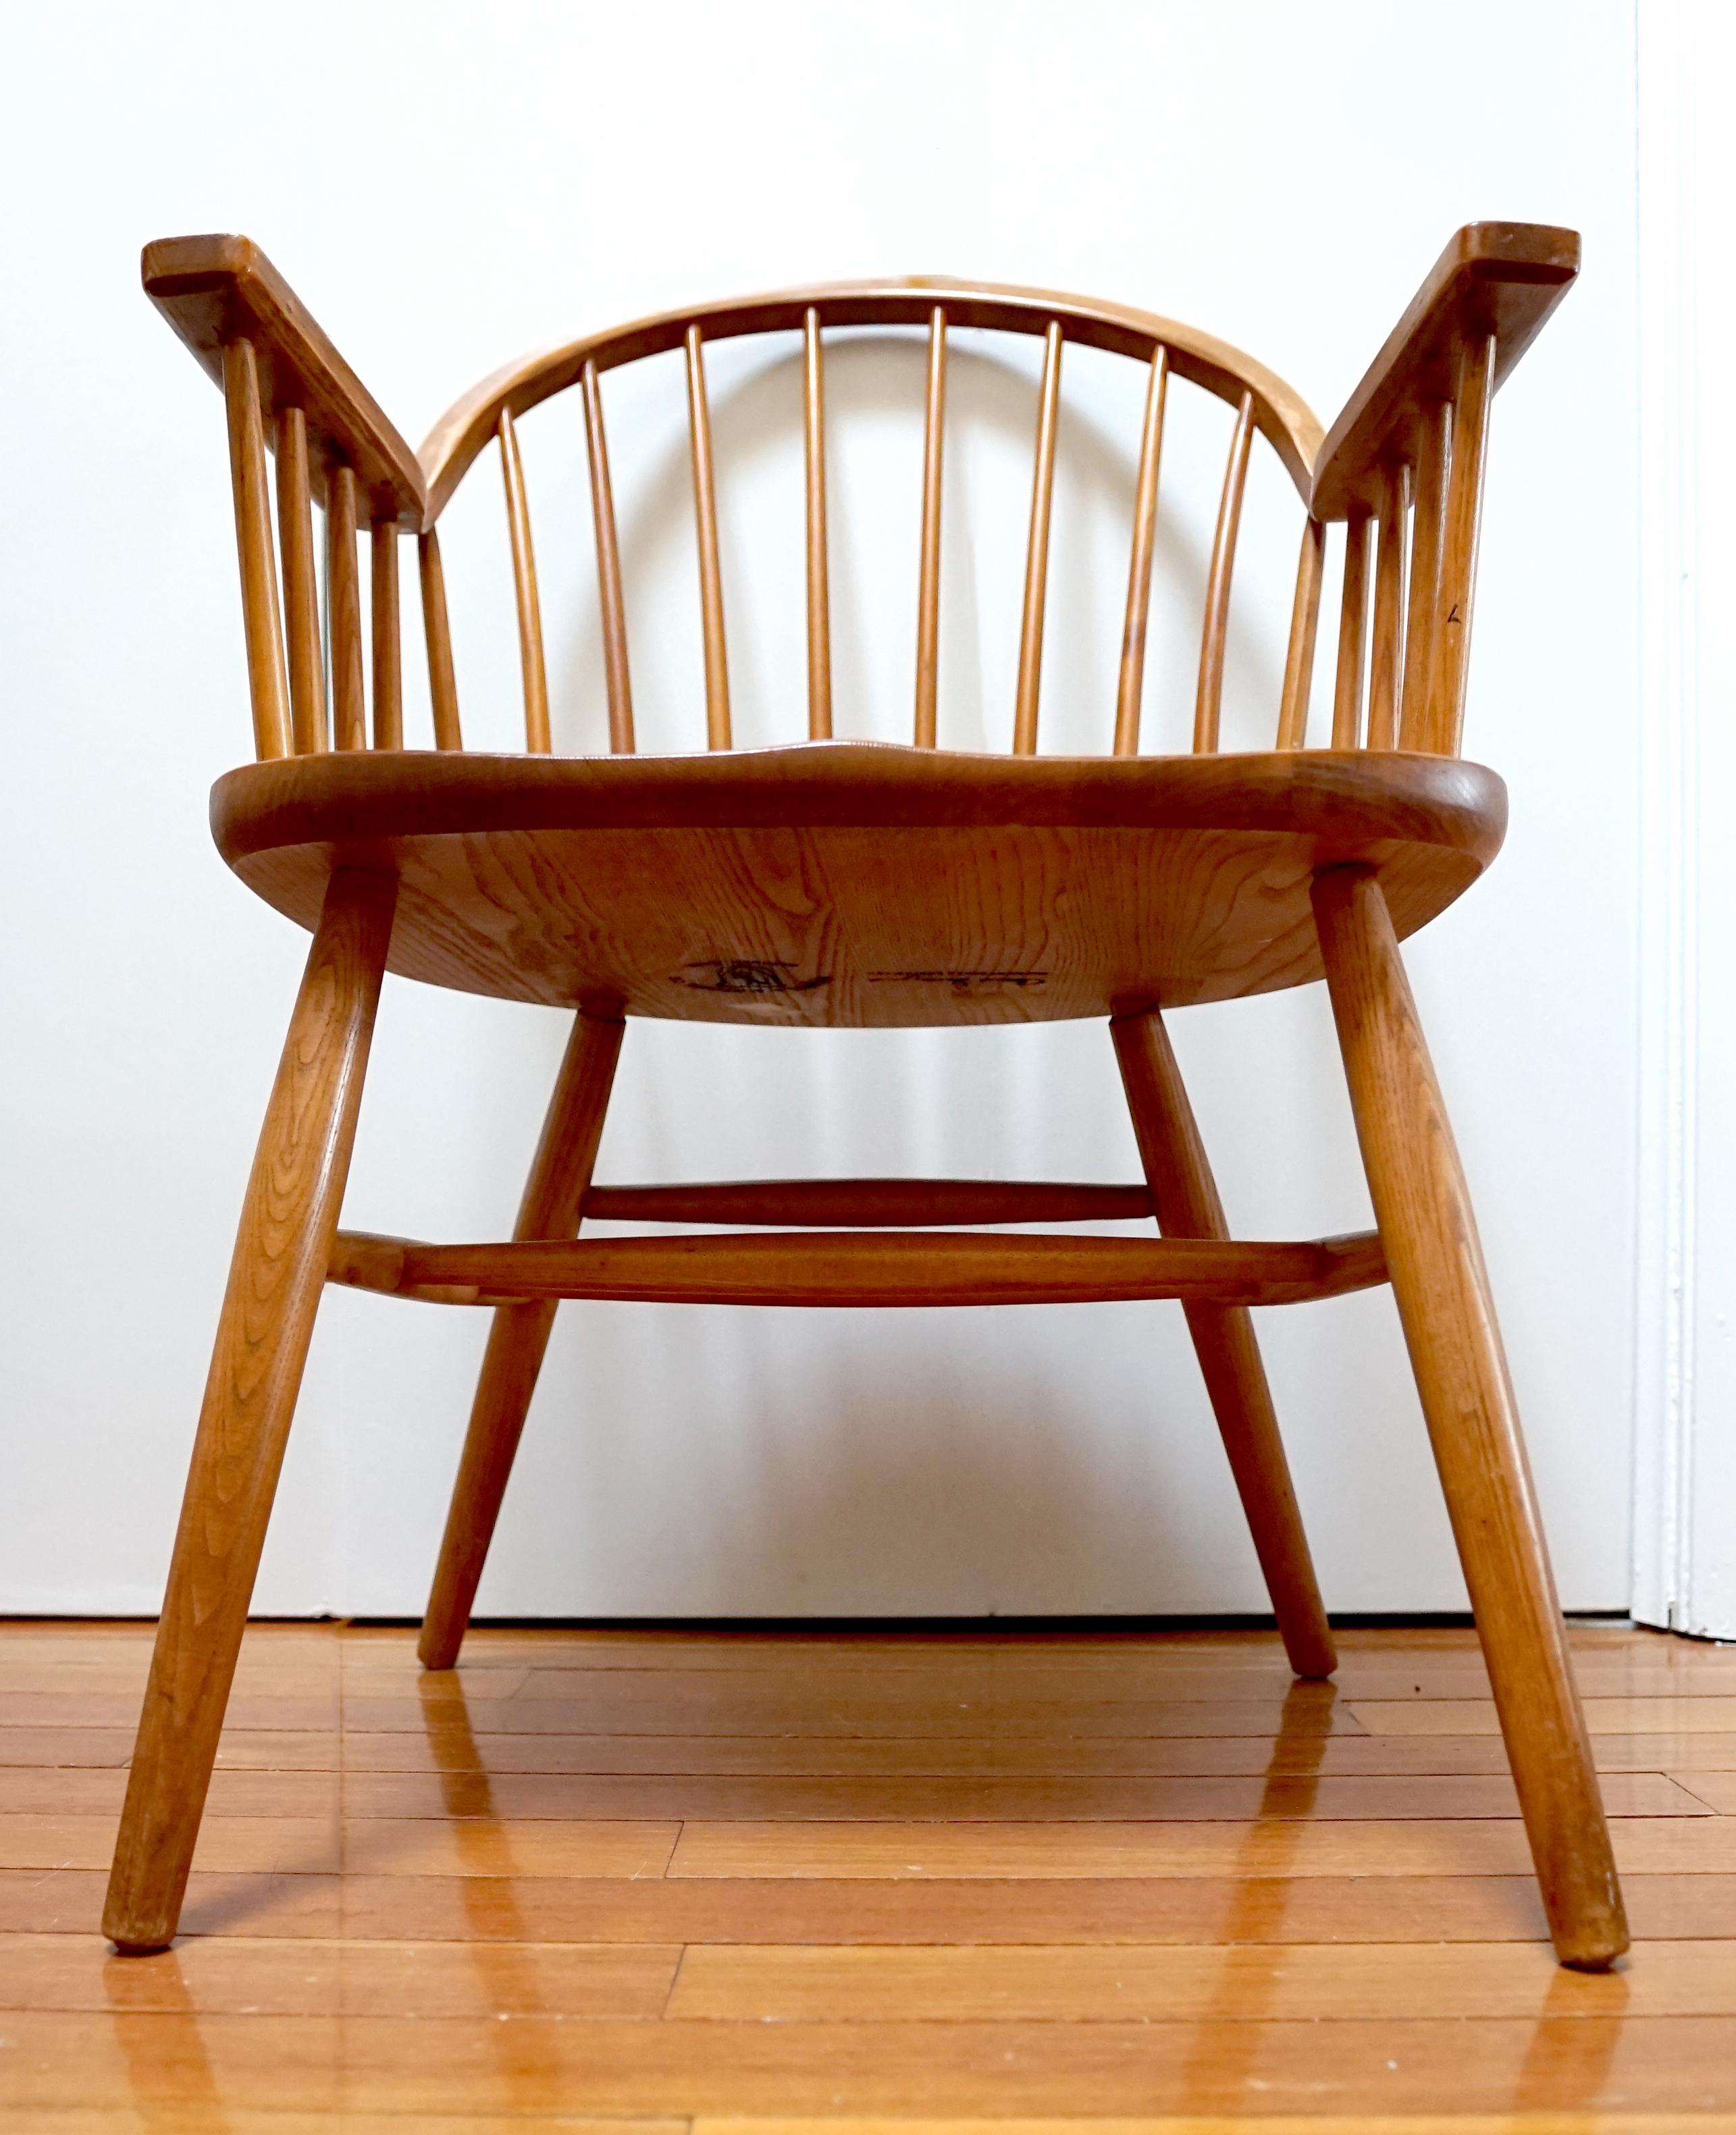 This large set of Nichols and Stone Windsor chairs is large and impressive enough to transform a dining or seating area. The chairs are beautiful and bear the name of the artist who designed them for Nichols and Stone in 1963, Claud Bunyard. 
The